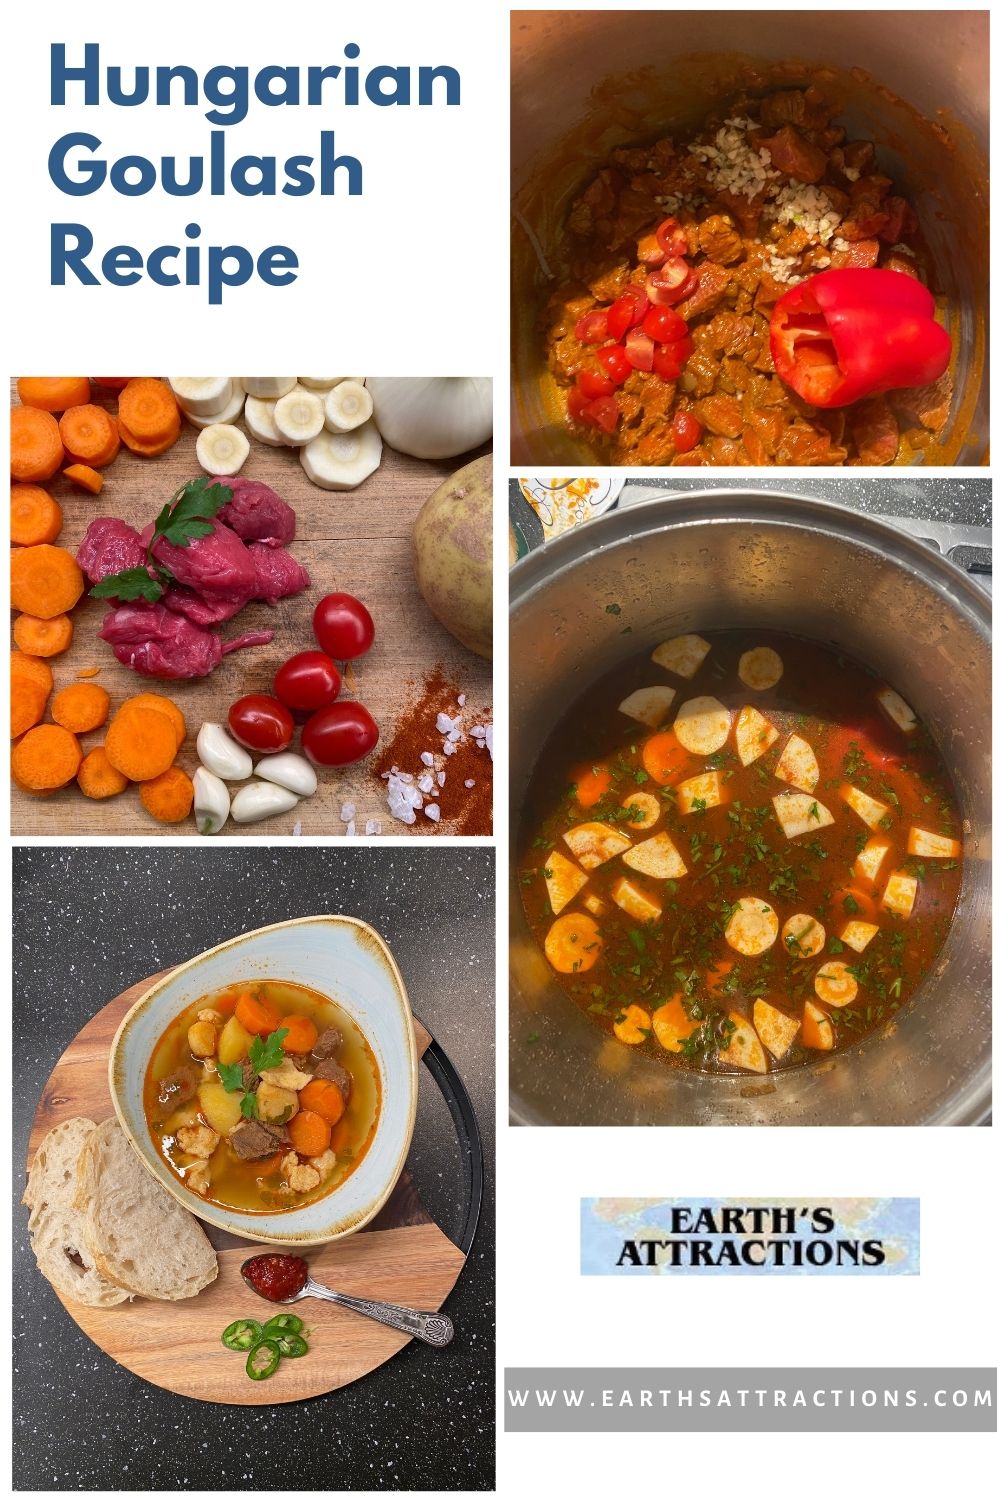 Goulash recipe. Discover how to make the Hungarian goulash with this complete recipe for beef goulash. The best traditional Hungarian goulash recipe. #goulash #hungarianfood #hungariandish #internationalfood #food #goulashrecipe #recipe #earthsattractions #hungariangoulash #beefgoulash #beefsoup